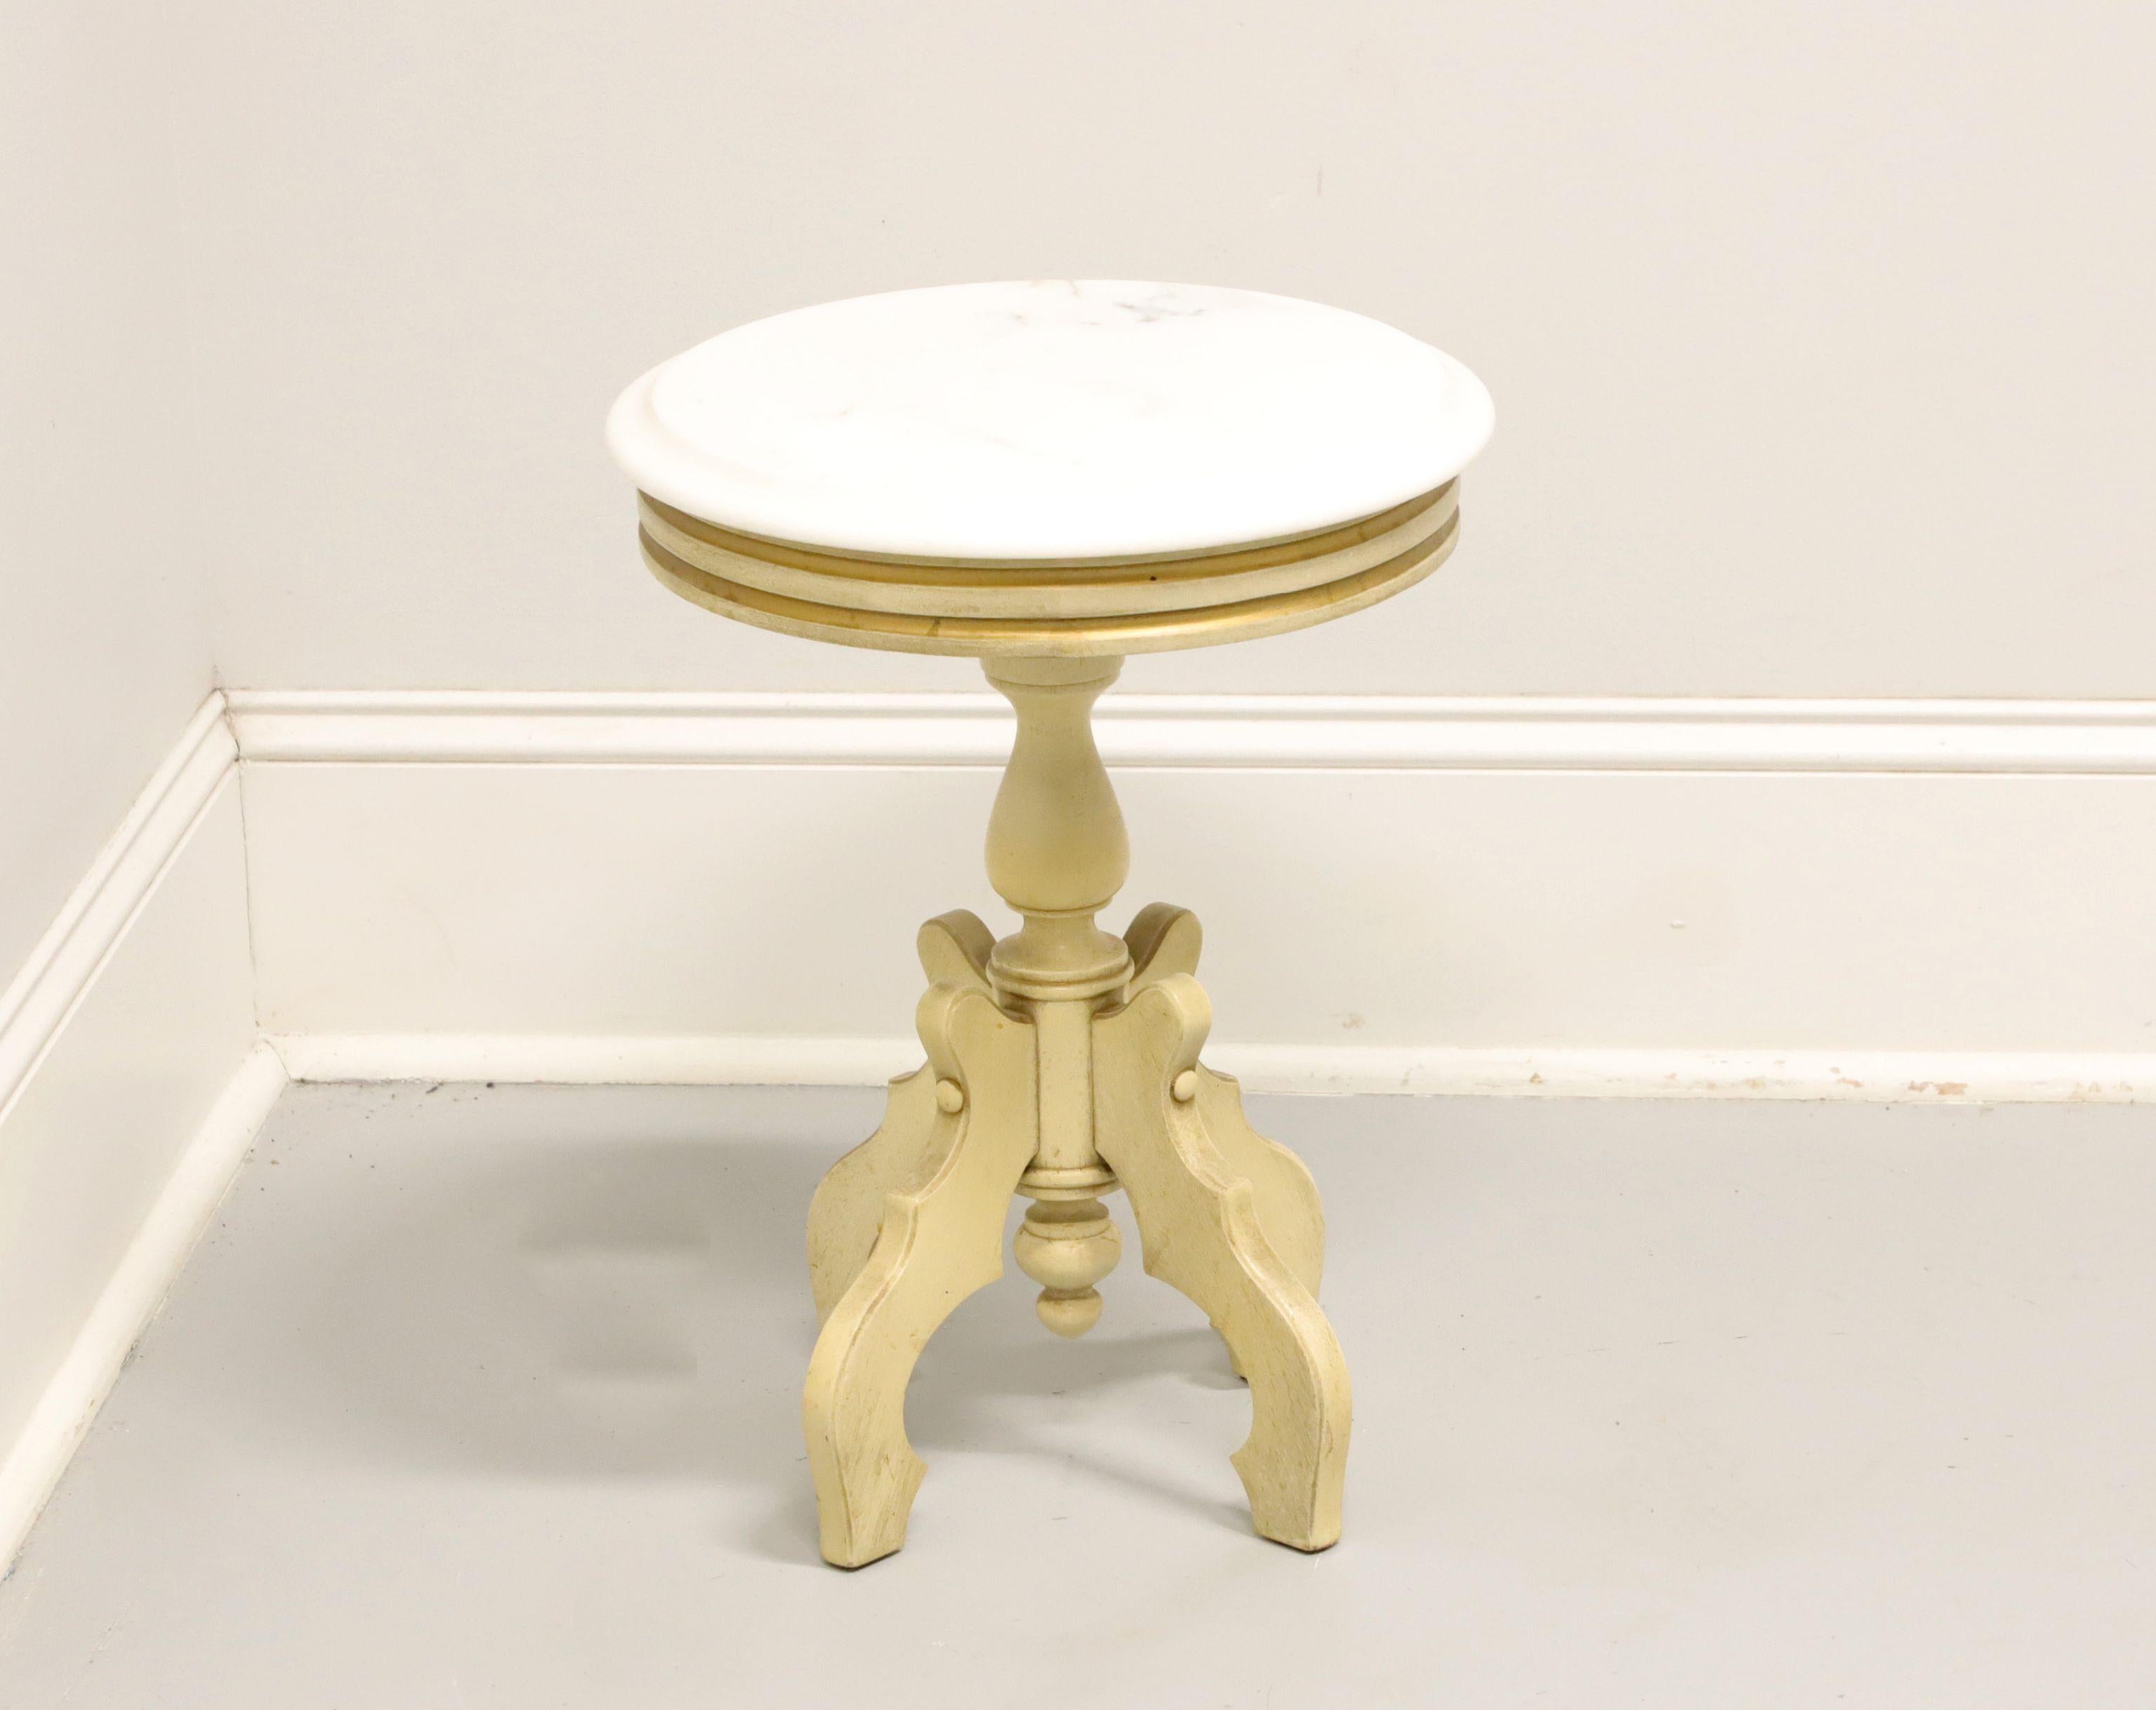 An antique Victorian style plant stand or side table, unbranded. Solid hardwood with slightly distressed, painted finish, round Italian marble bevel edge top, turned pedestal base, decorative reverse finial at bottom, and four carved curved legs.